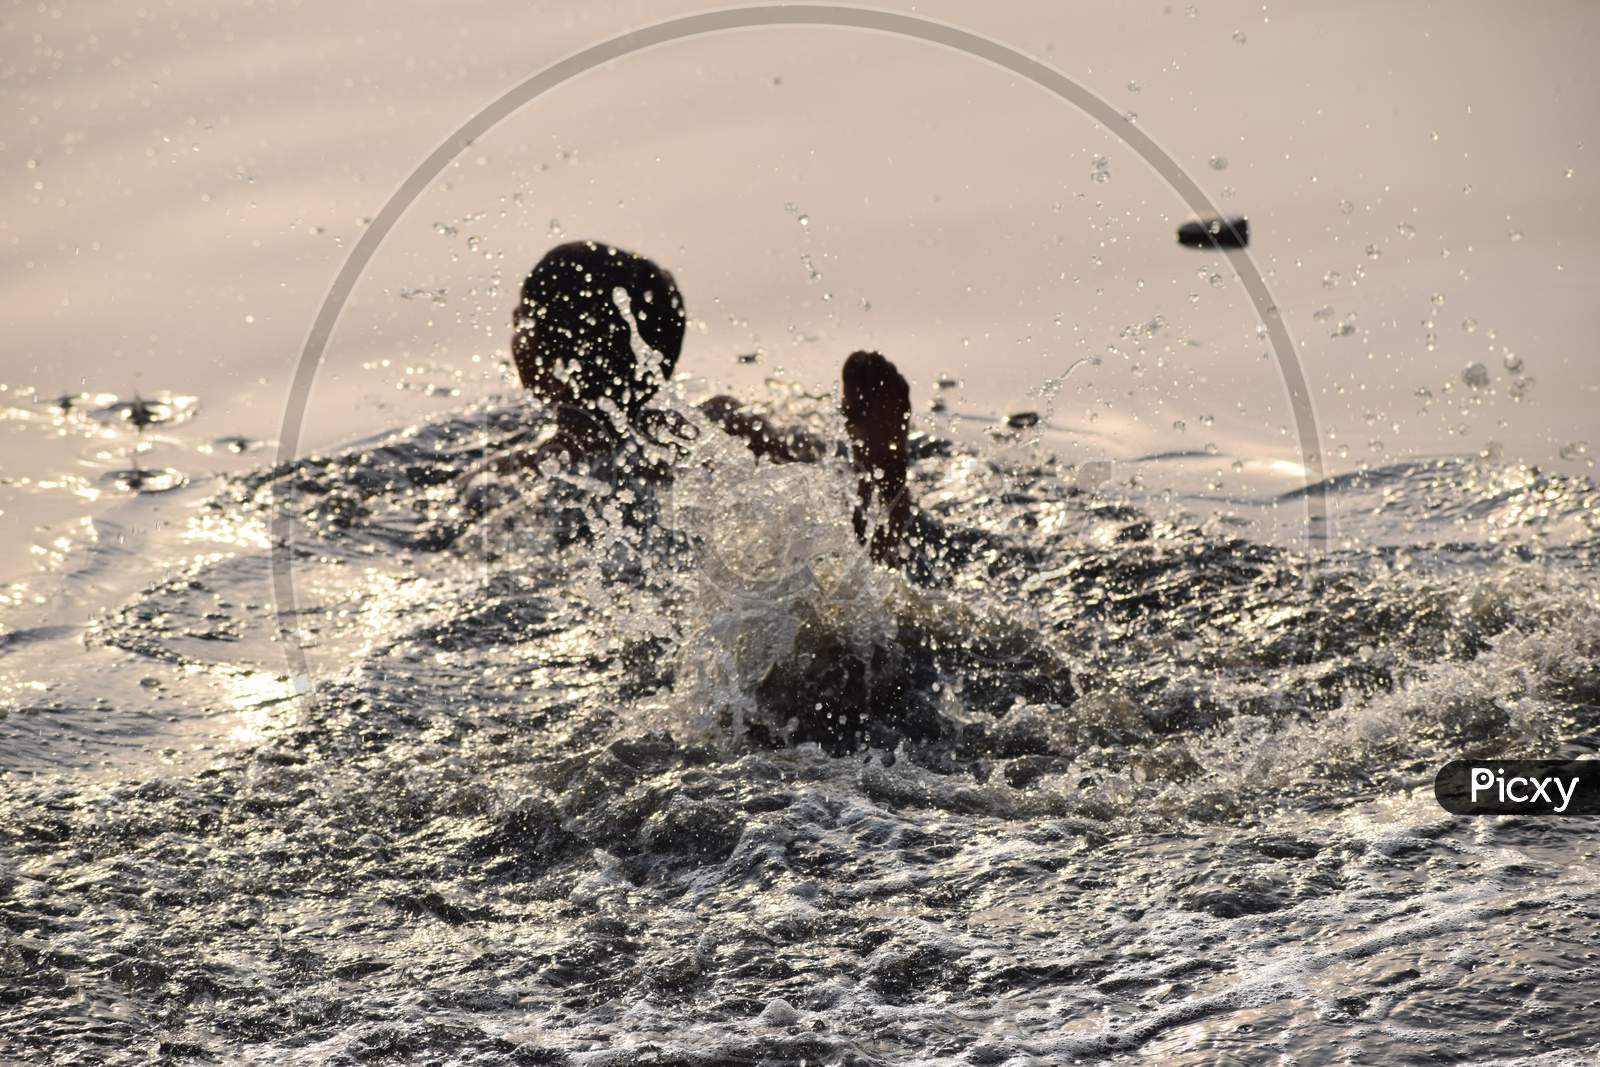 Delhi, India - Dec 31, 2019 : Man Taking Bath In Holy River Of Yamuna During Morning Time In Delhi India, People Taking Holy Dip Inside Yamuna River